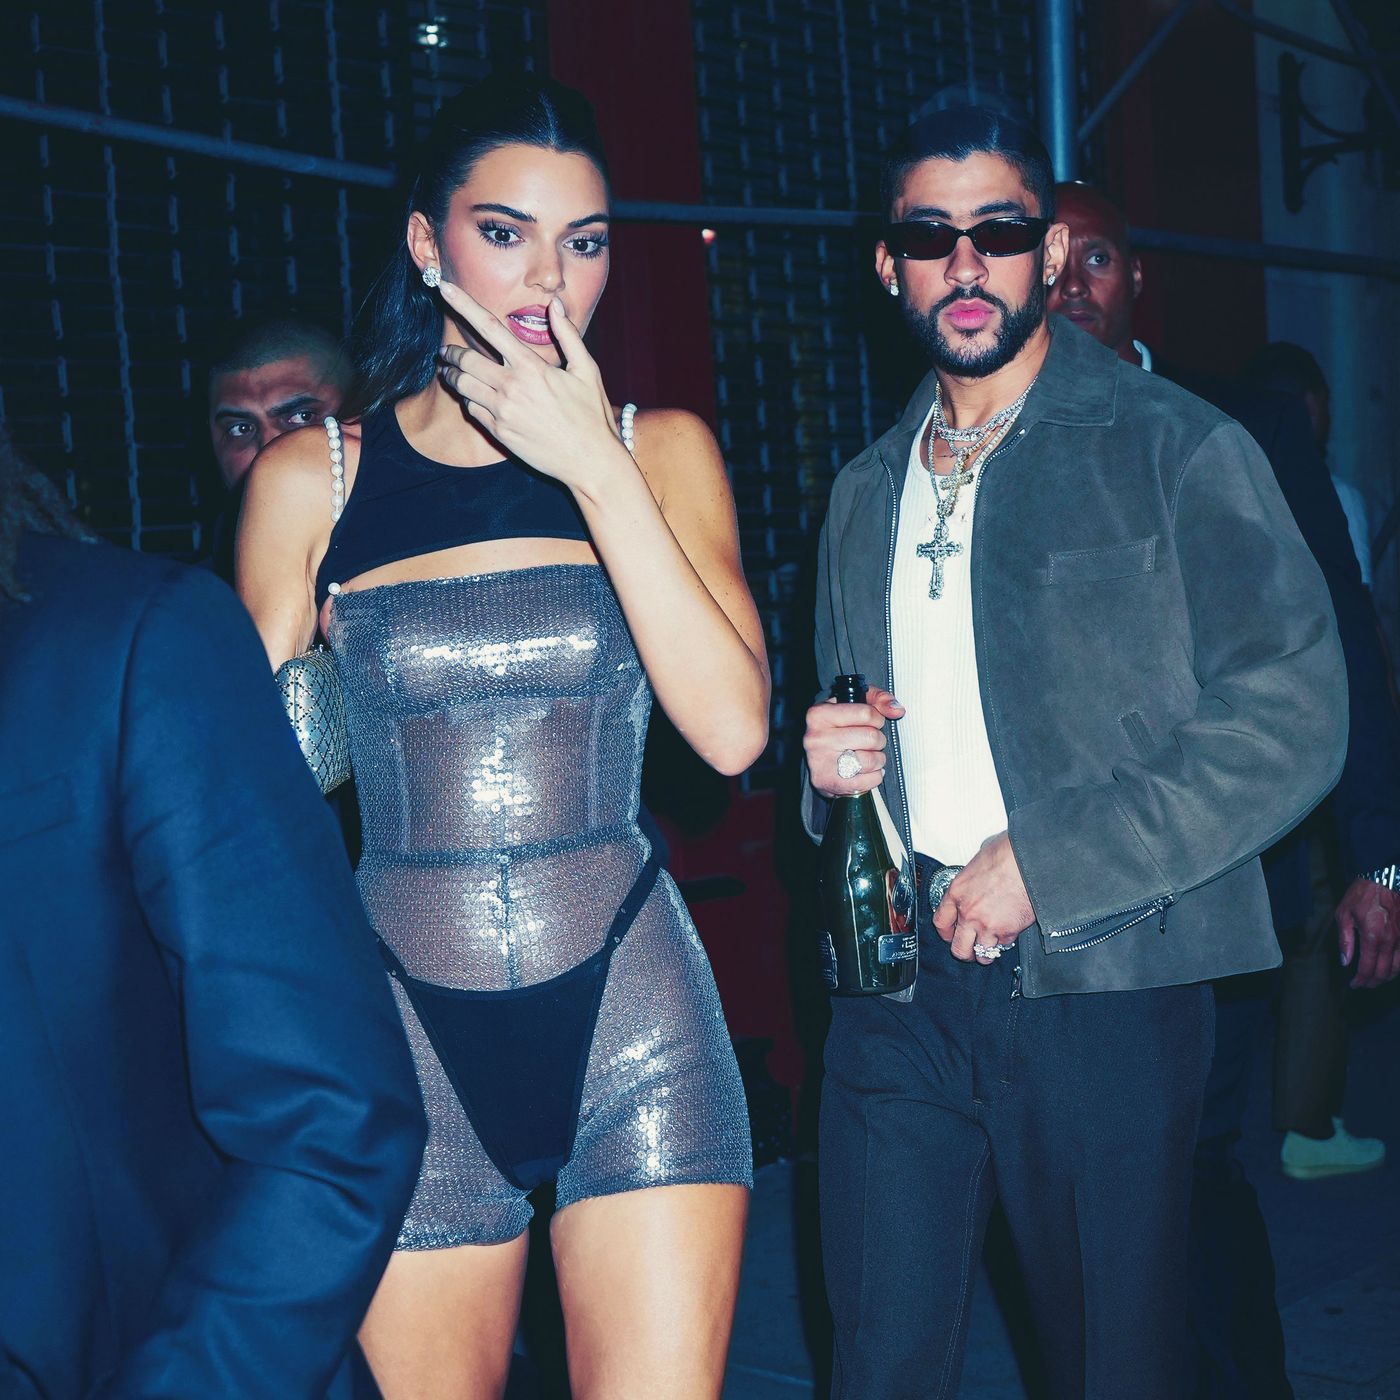 Kendall Jenner and Bad Bunny Looked Friendly at the Met Gala